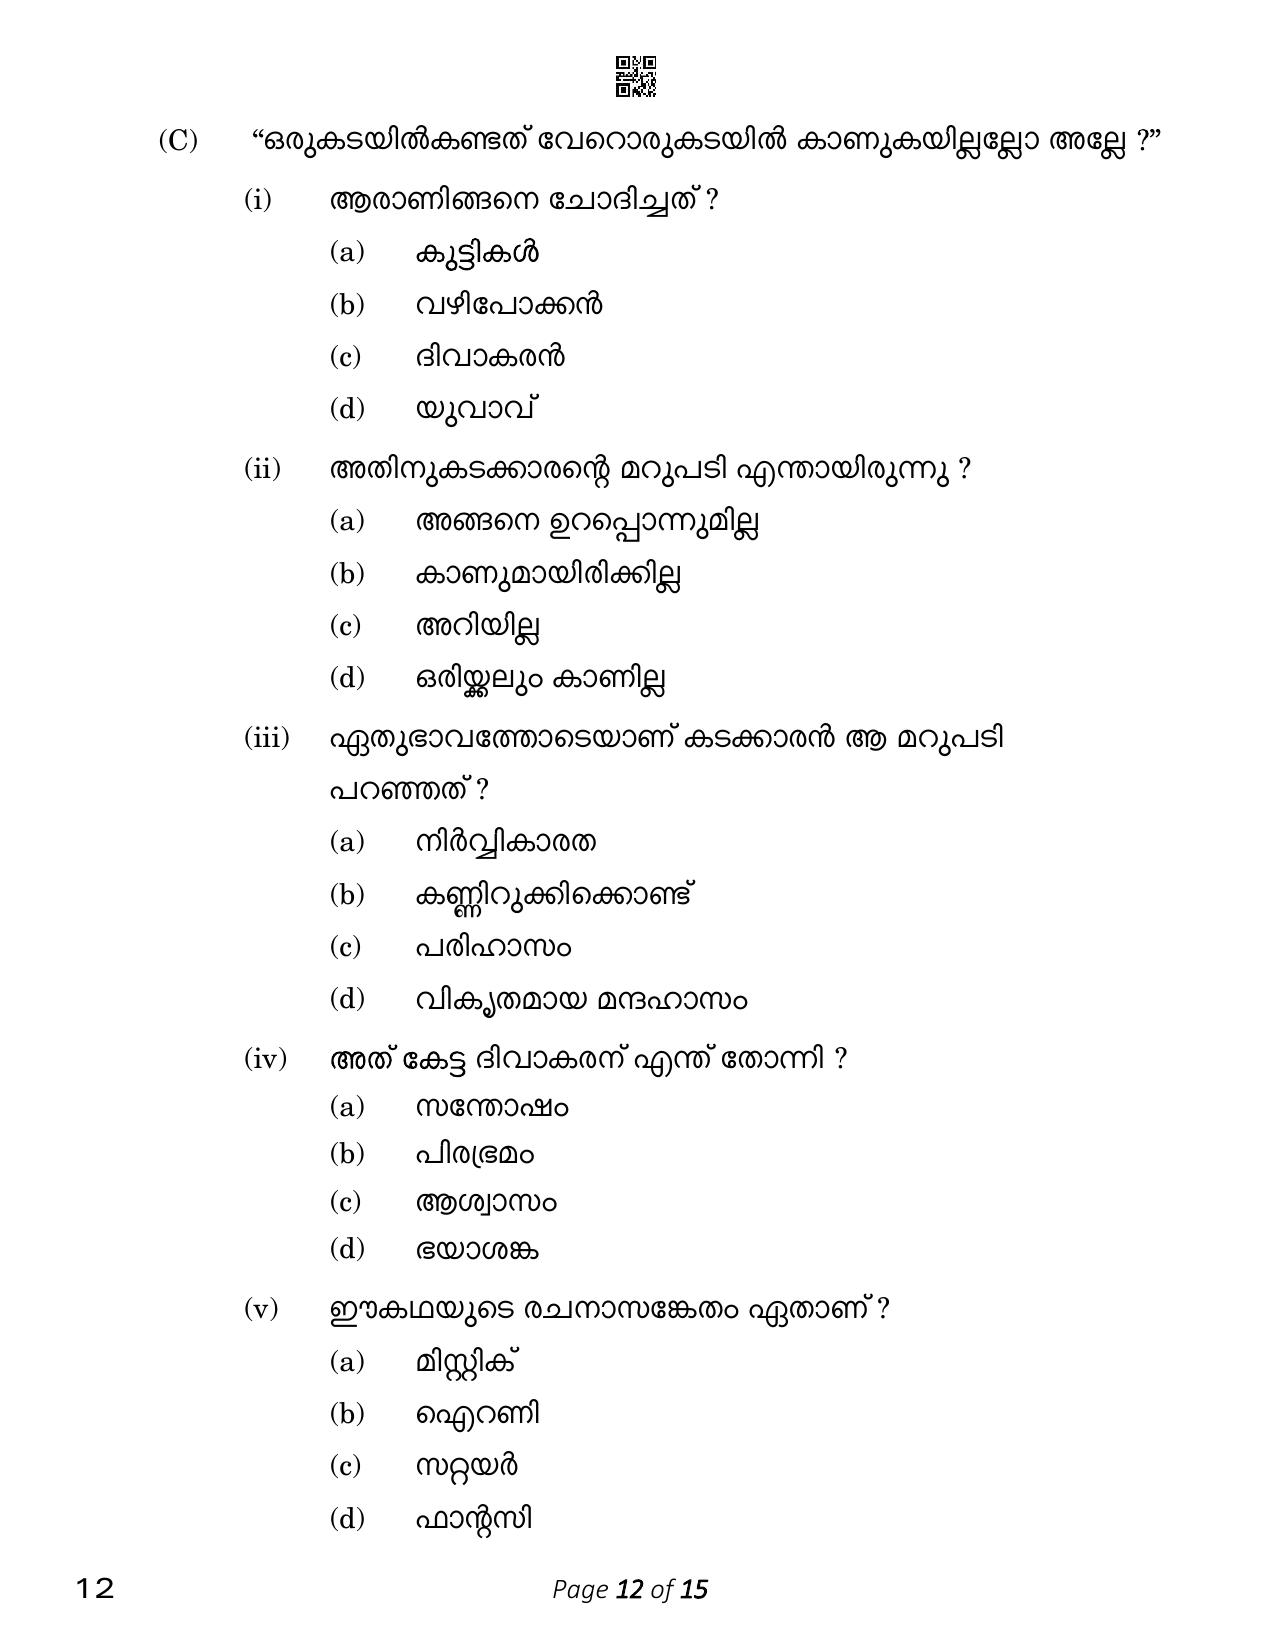 CBSE Class 12 Malayalam (Compartment) 2023 Question Paper - Page 12